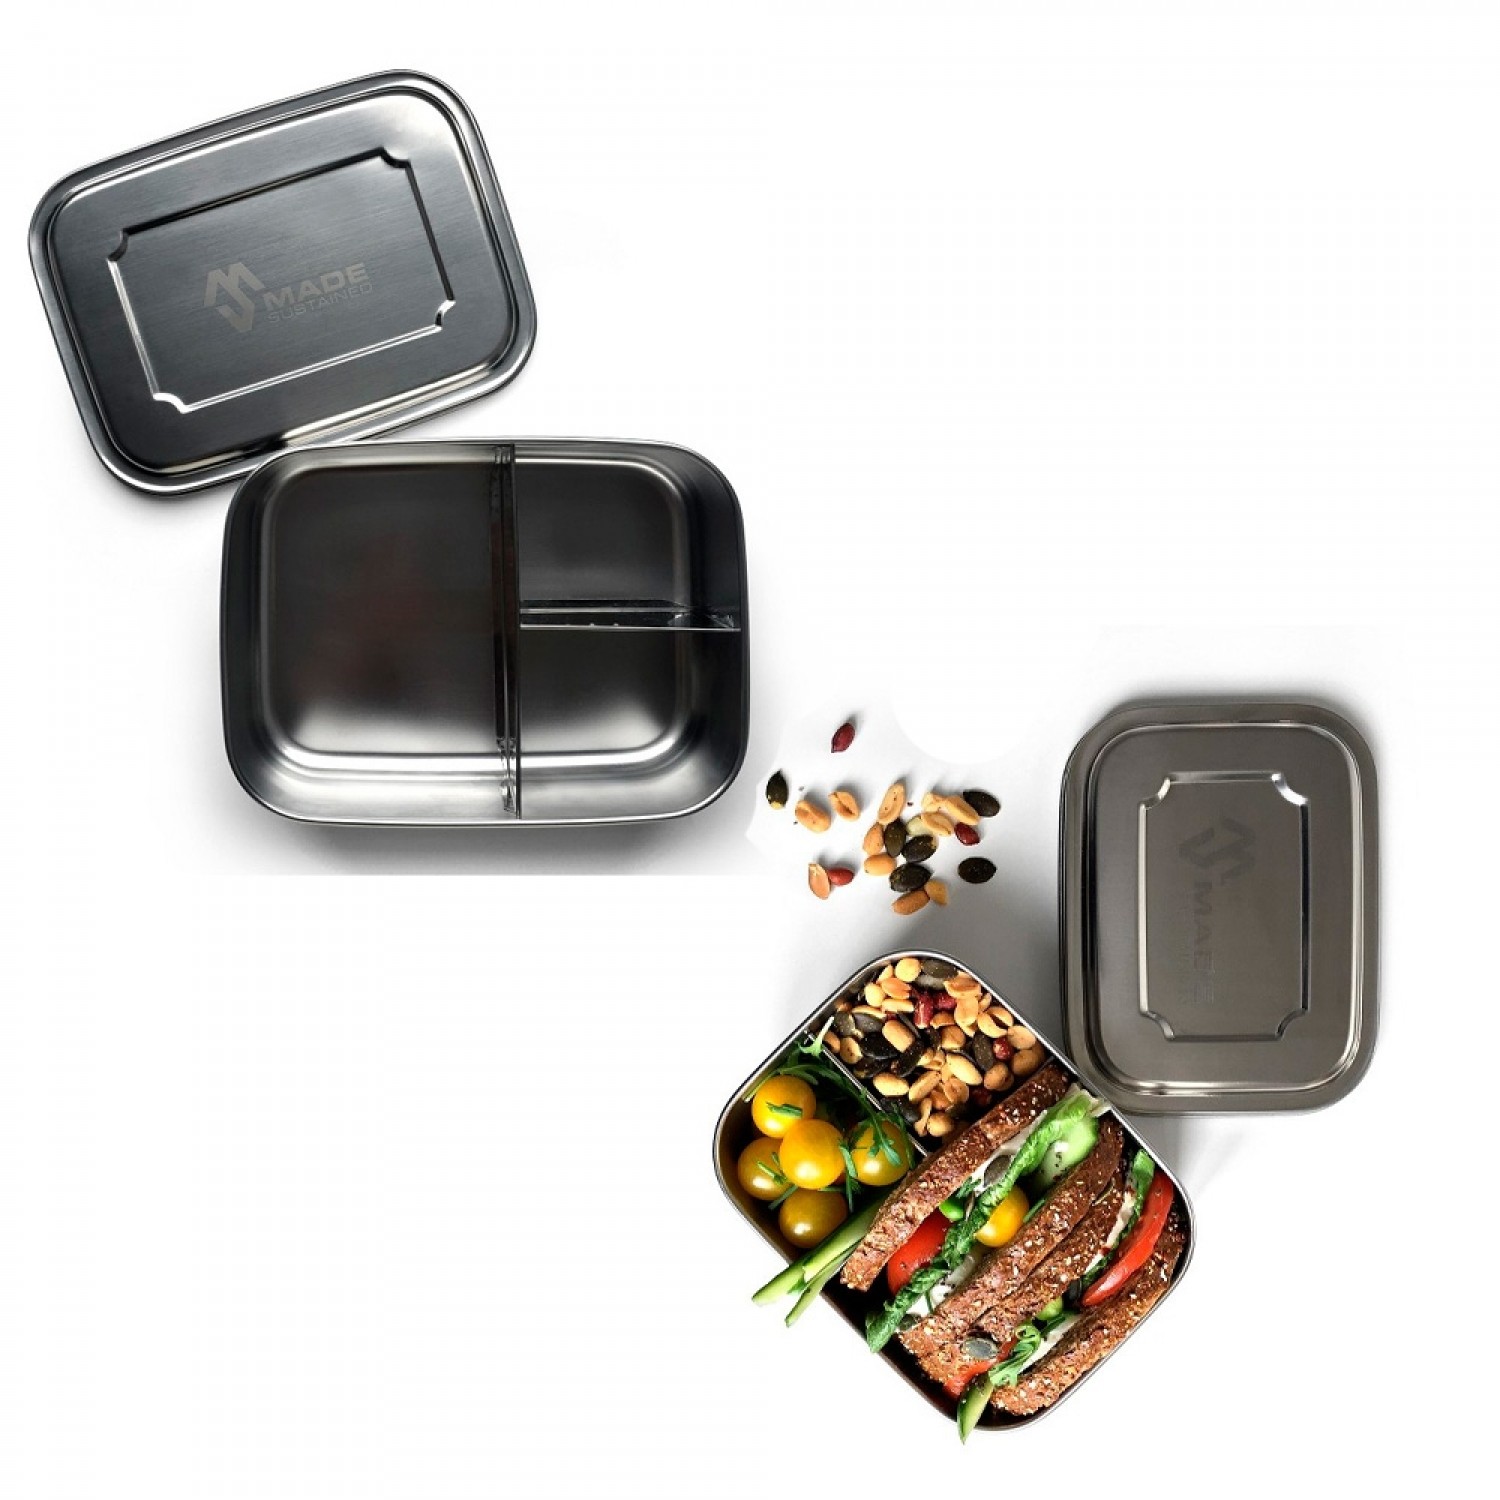 Trio Lunchbox made of Stainless Steel | Made Sustained